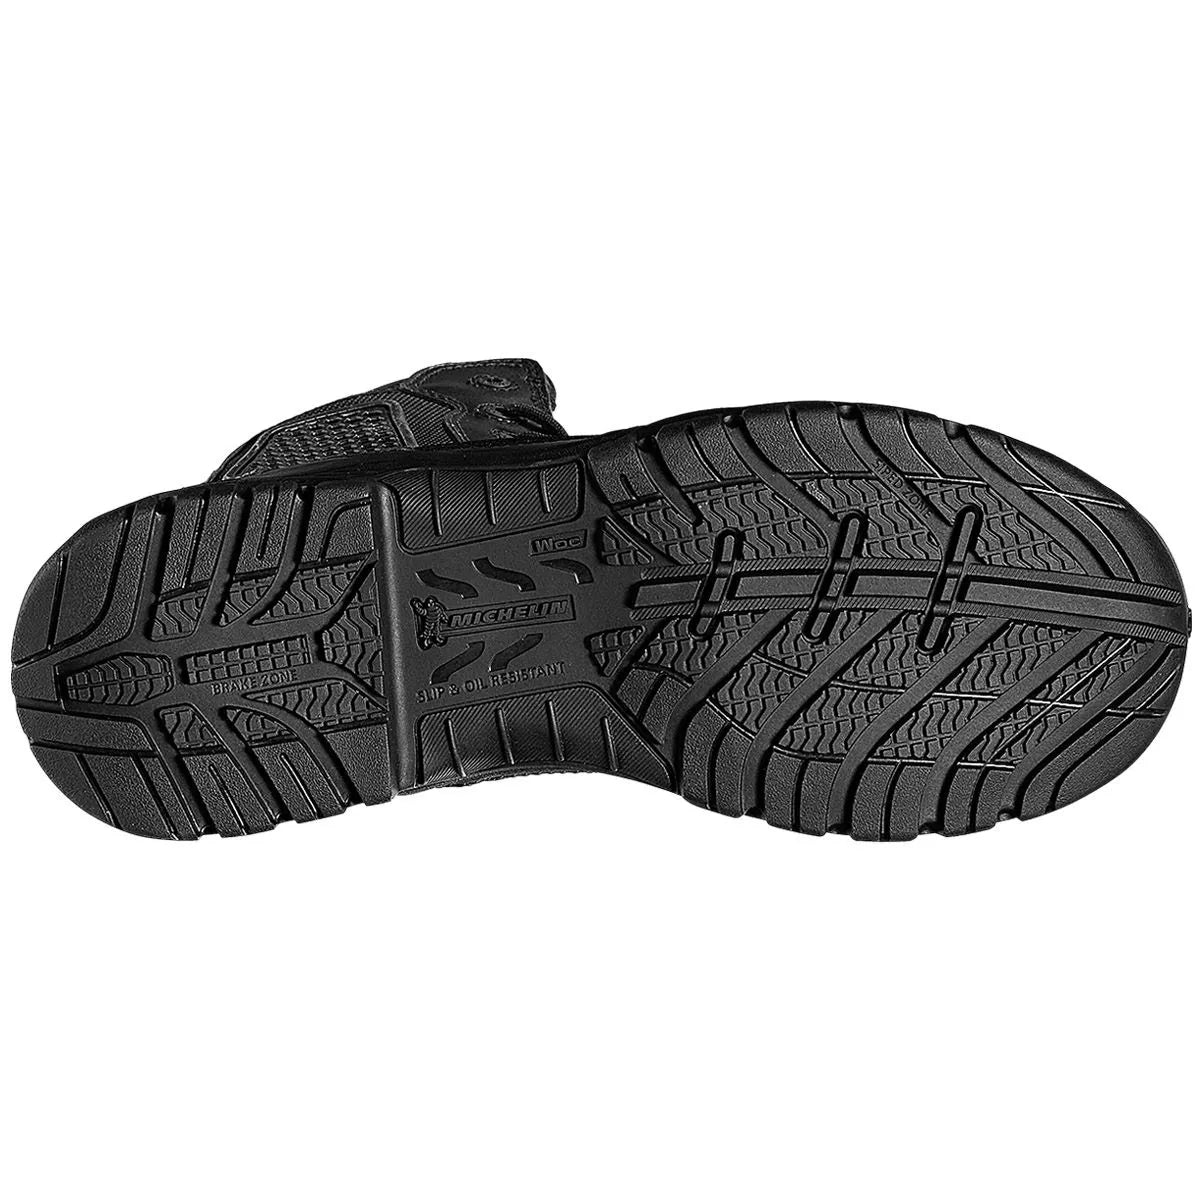 Tactical Footwear - M-P.A.C.T Response PU foam insole for maximum comfort and shock absorption.